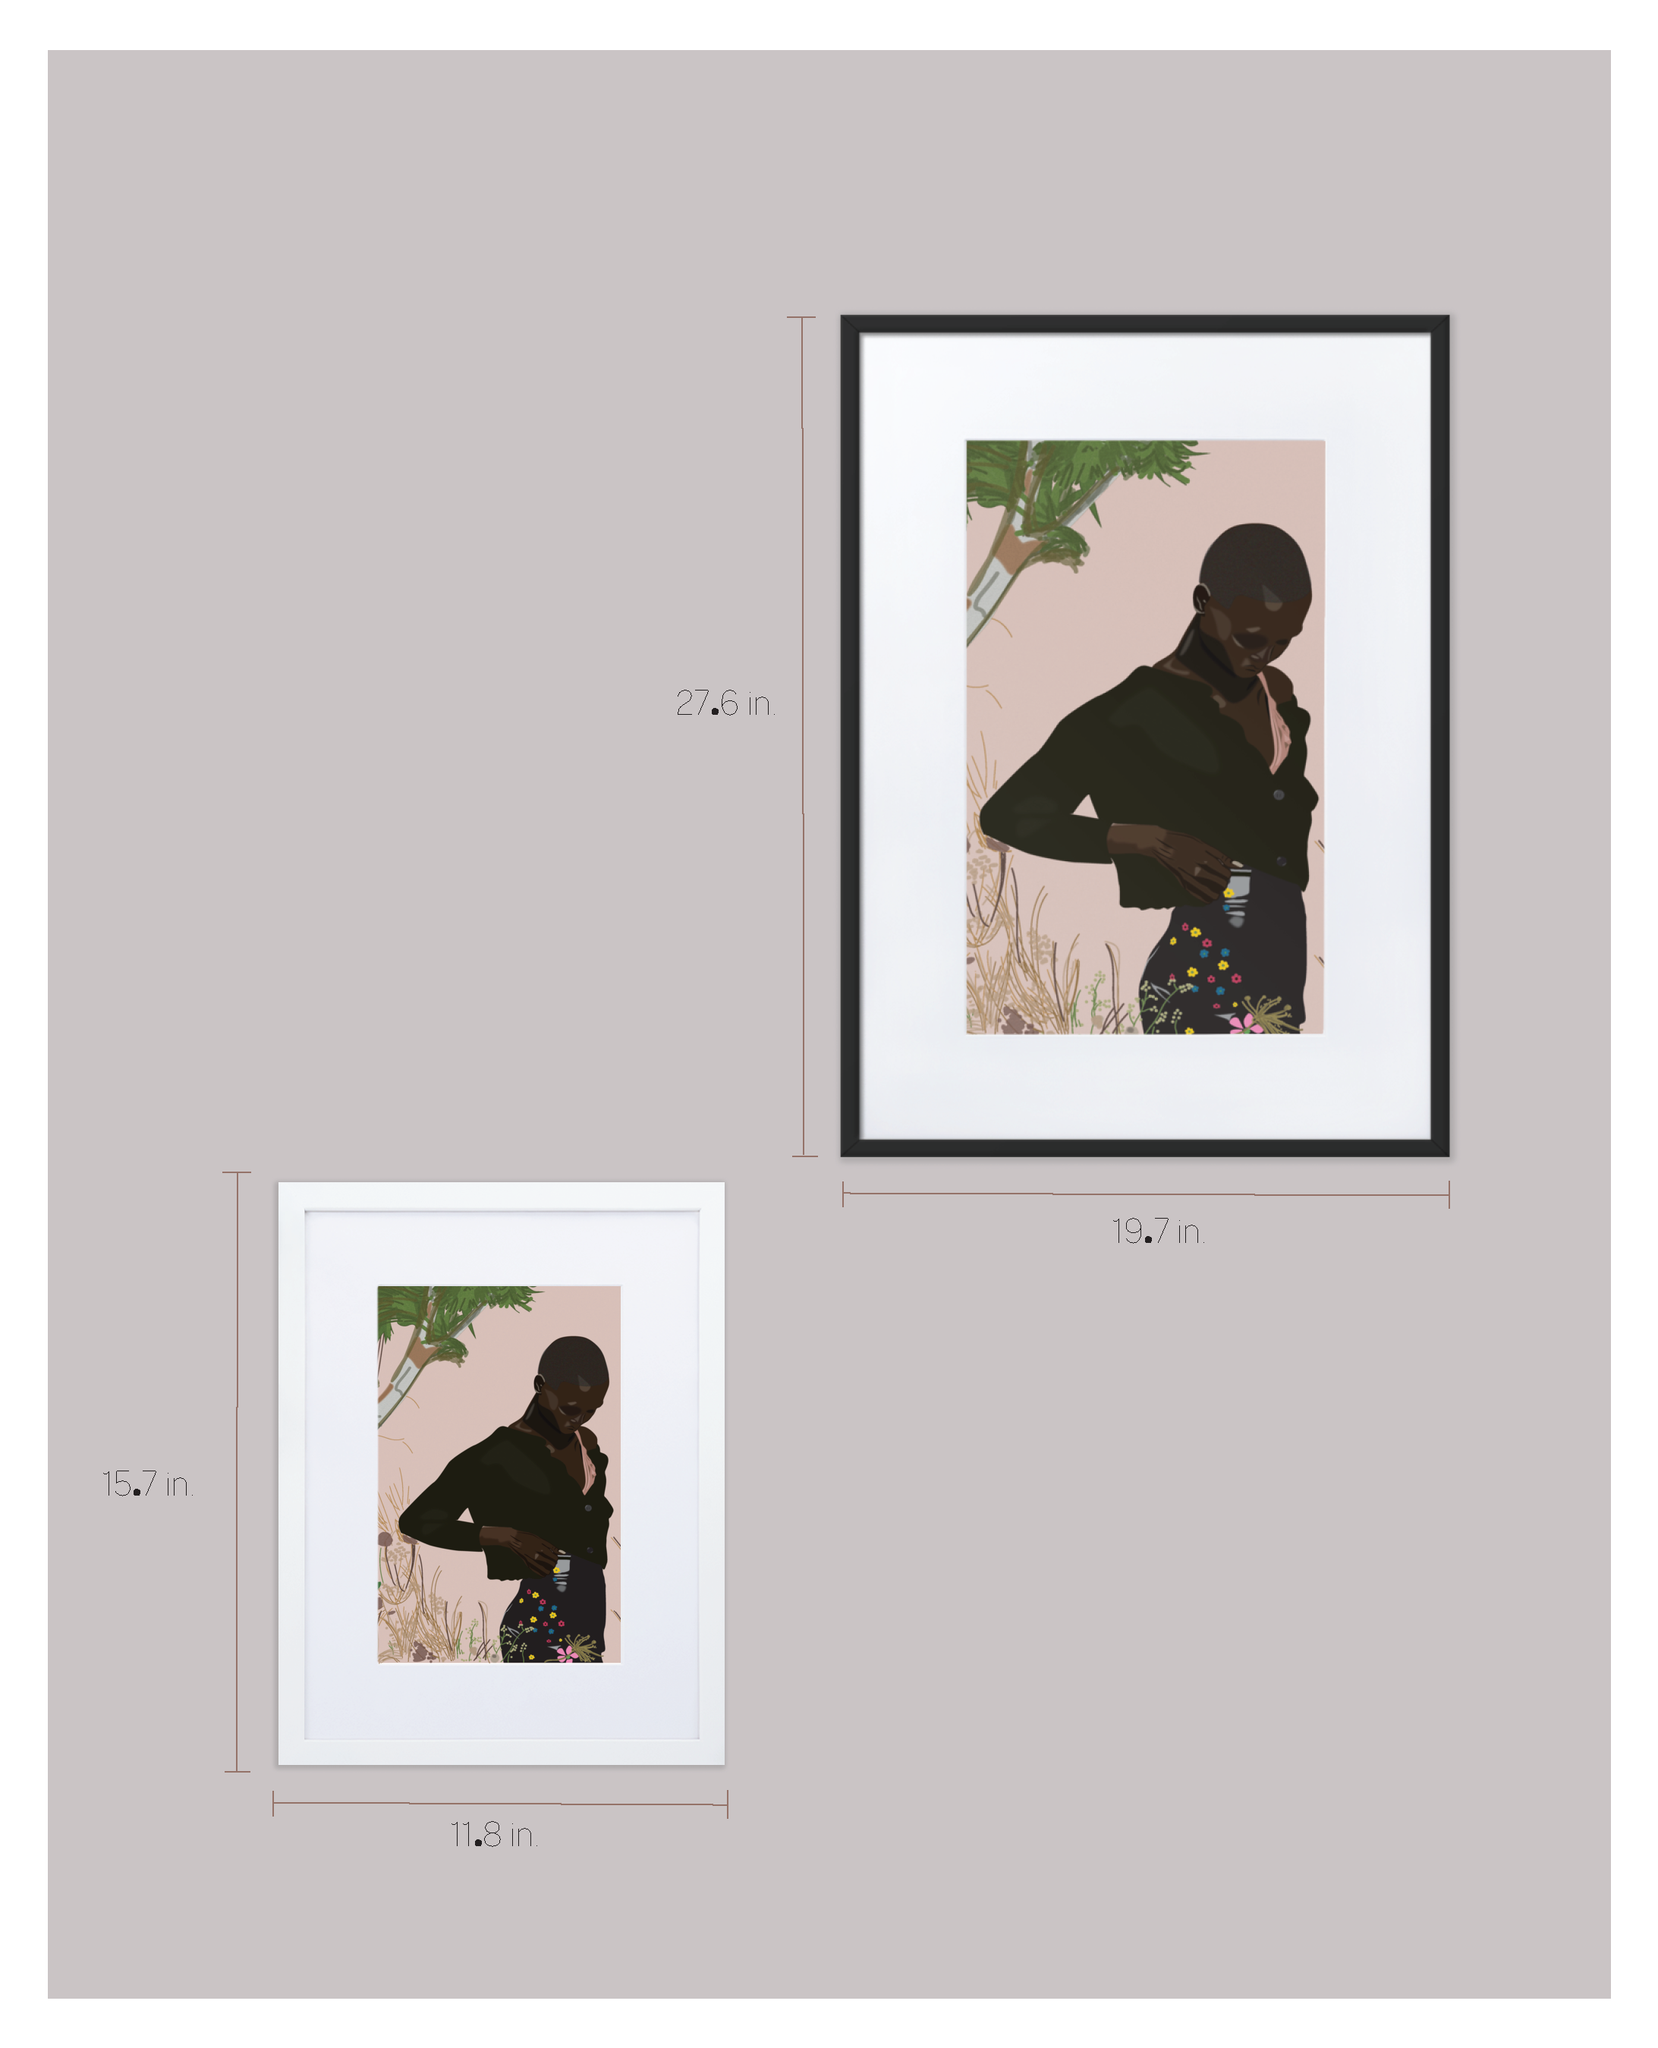 A framed digital fashion illustration of Black model Amar Akway posing in a garden wearing a black Miu Miu sweater and skirt, shown here in two different sizes